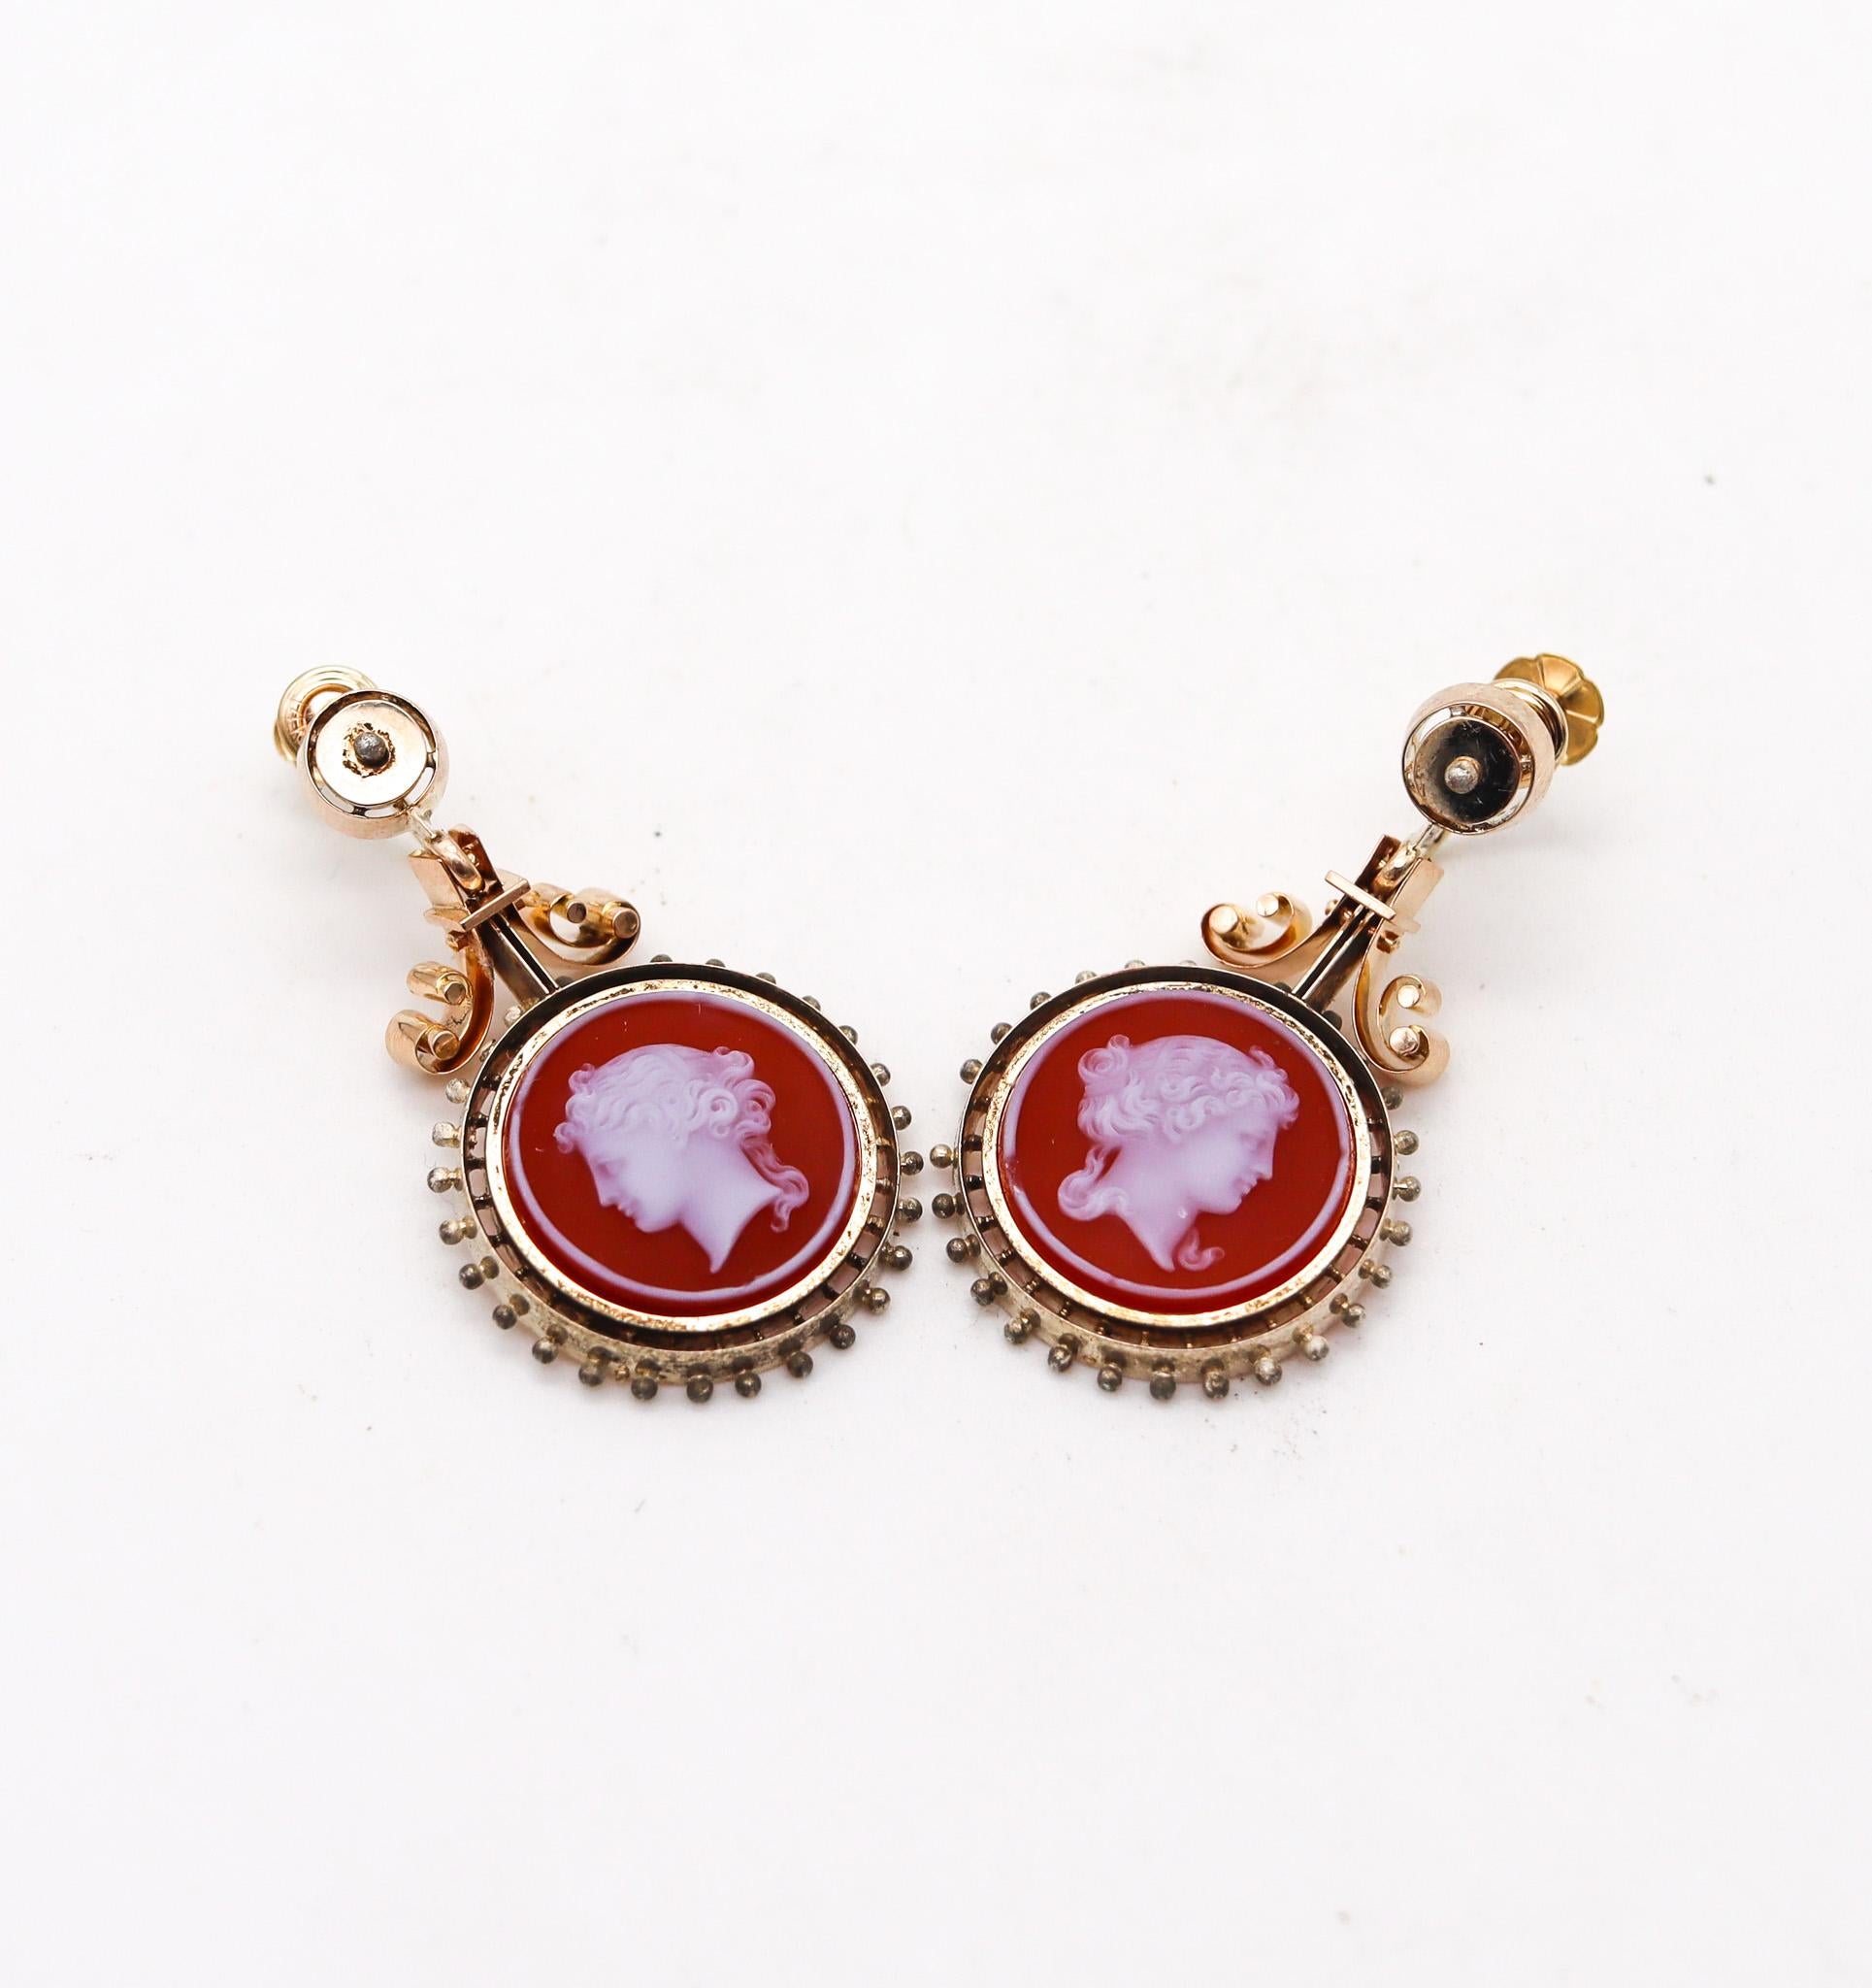 Victorian Etruscan Revival dangle drop earrings.

Beautiful antique dangle drops earrings, created in England during the Victorian Era (1837-1901), circa 1850. This pair of earrings has been made up with intricate Etruscan revival patterns of